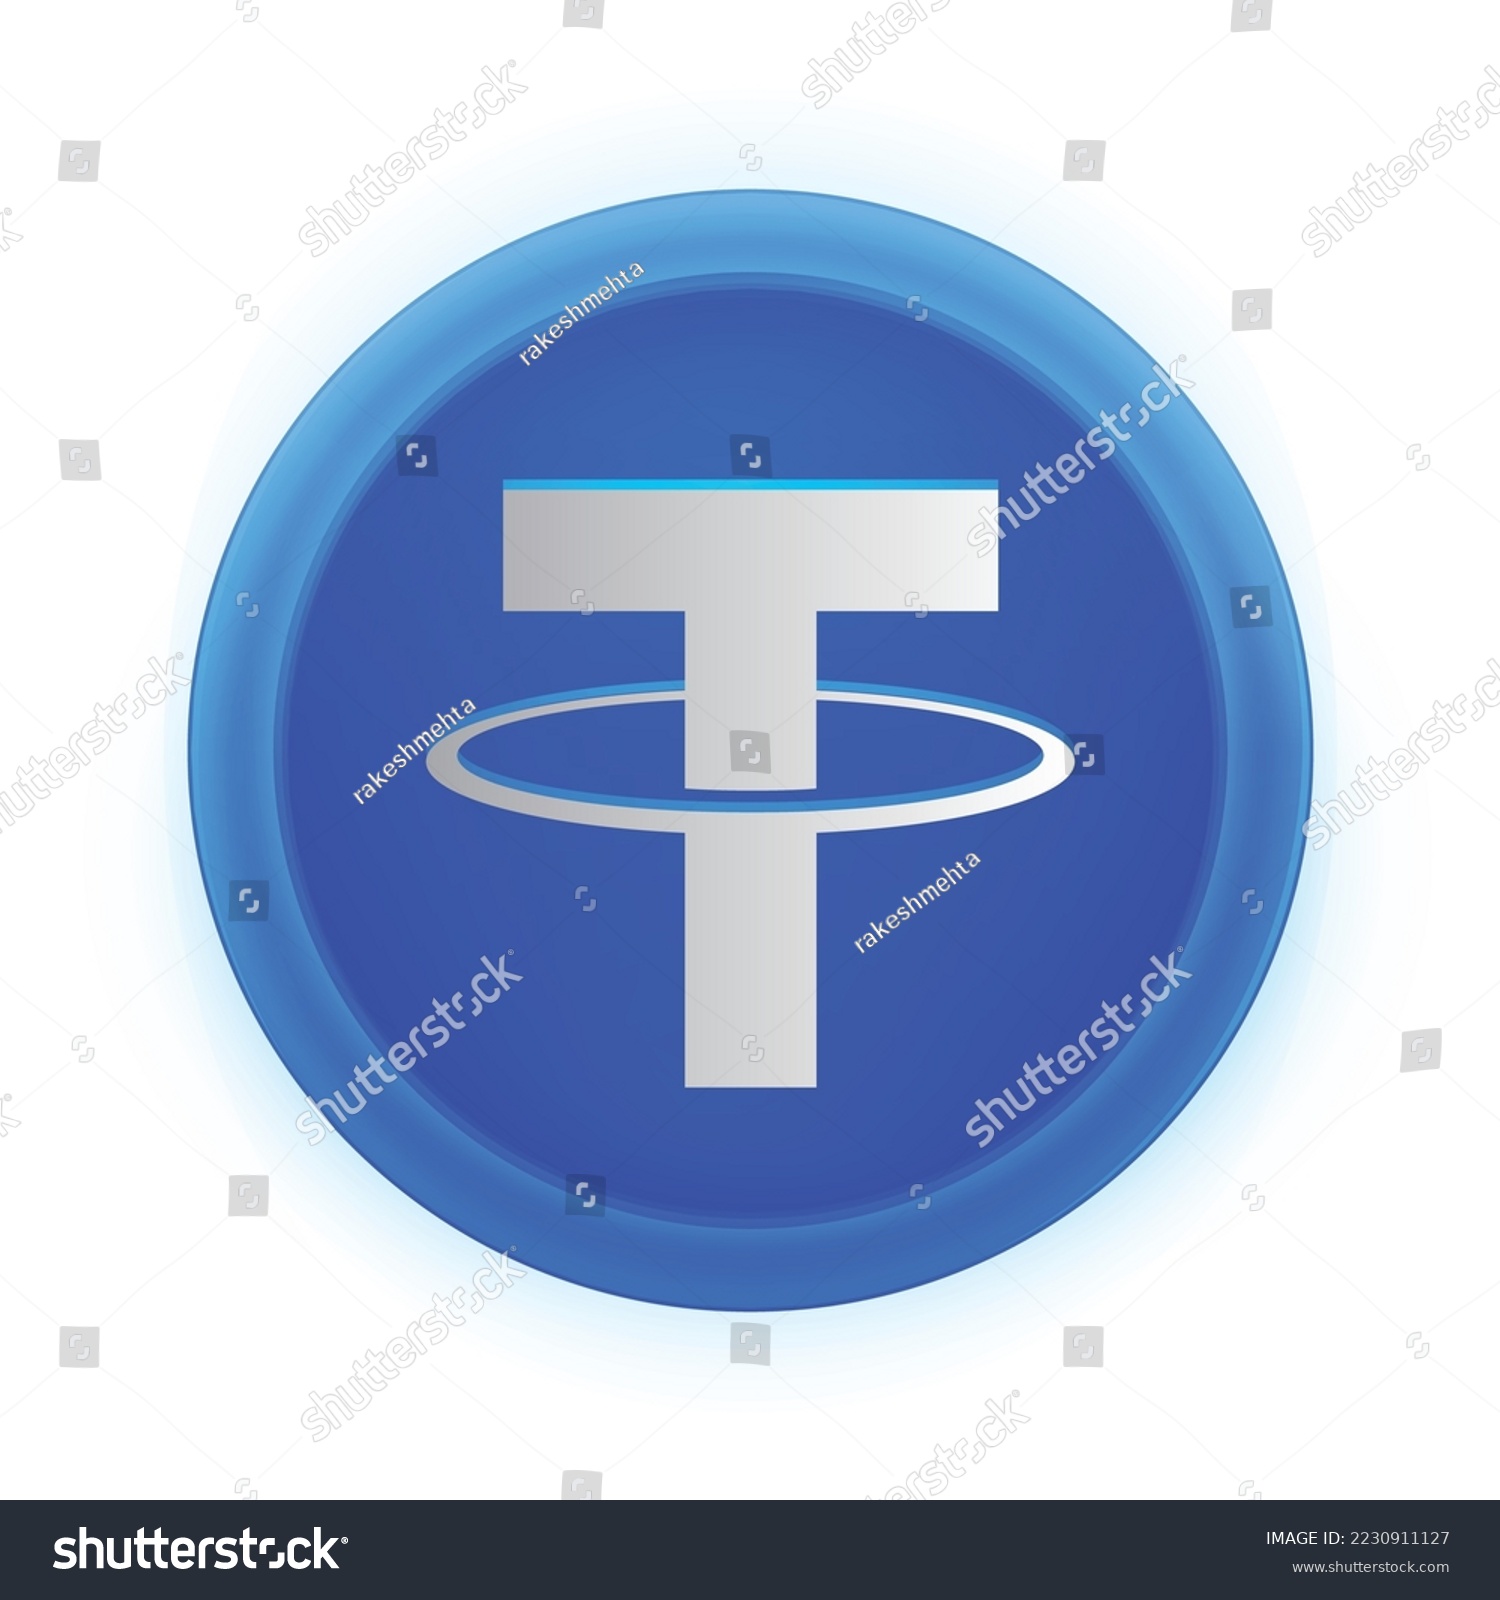 SVG of Tether (USDT) crypto logo isolated on white background. USDT Cryptocurrency coin token vector svg